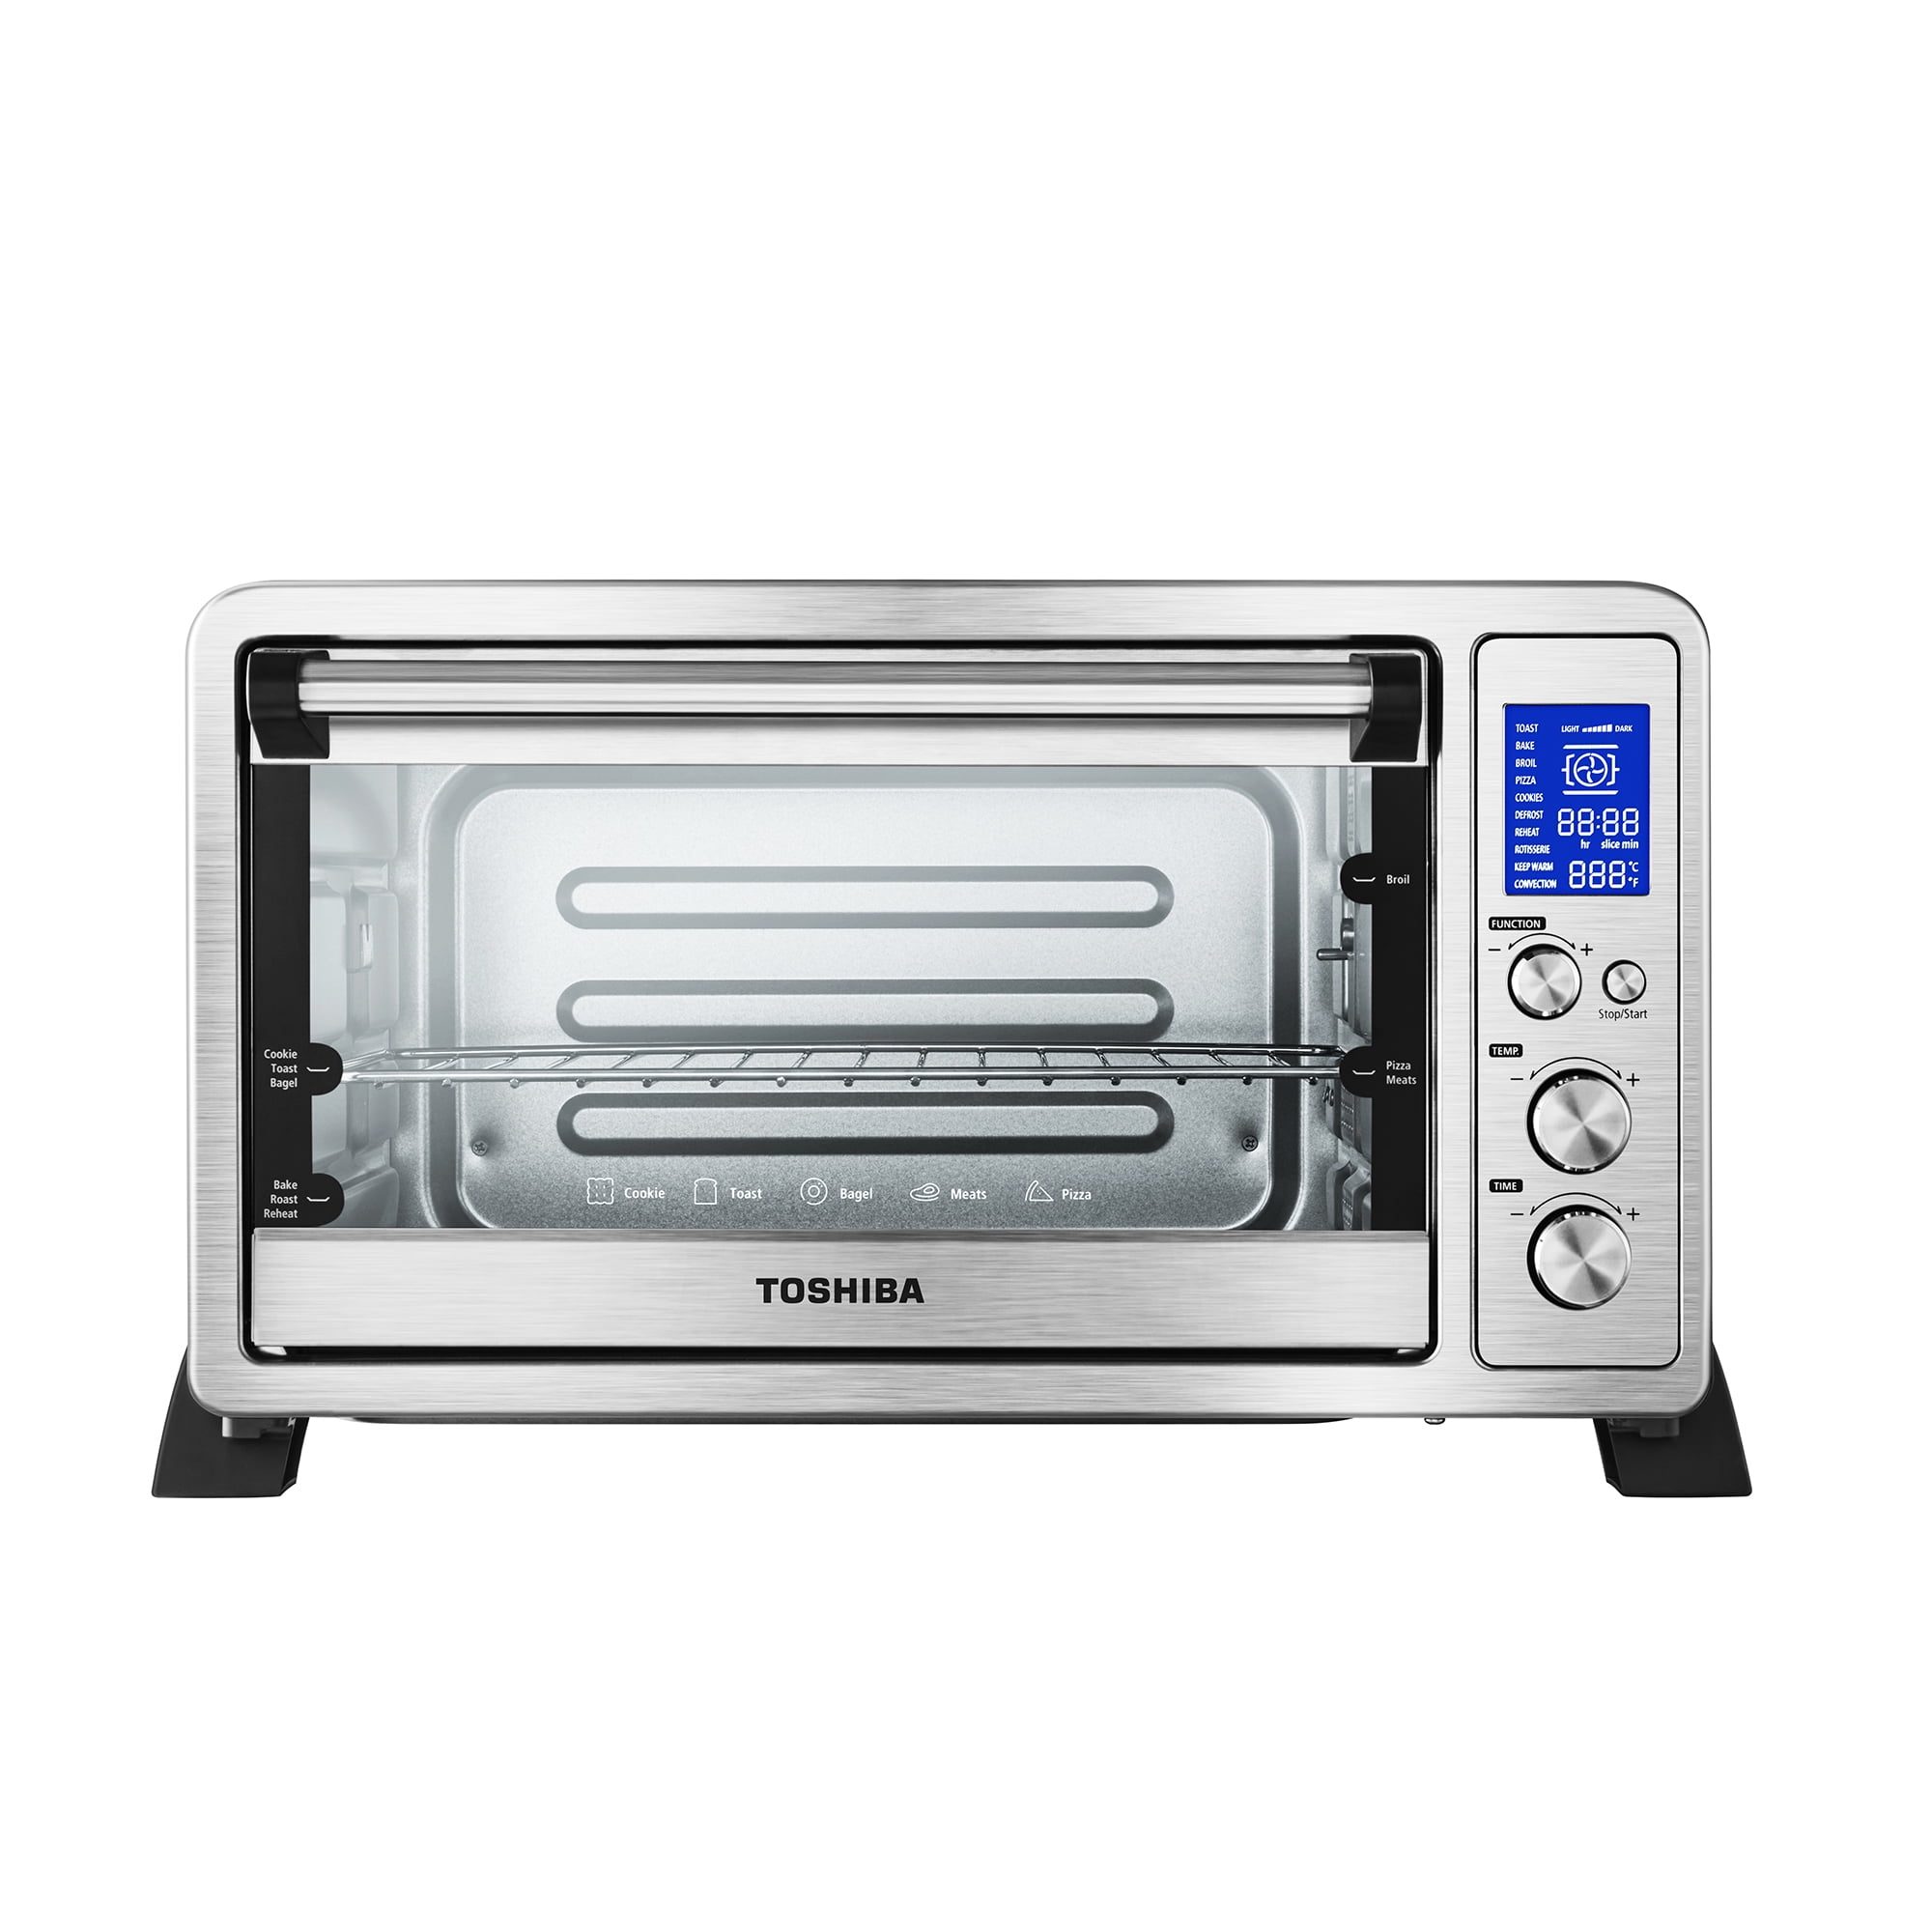 TOSHIBA Hot Air Convection Toaster Oven, Extra Large 34QT/32L, 9-in-1  Cooking Functions, Crispy Grill, Dehydrate, Rotisserie, 6 Accessories  Included